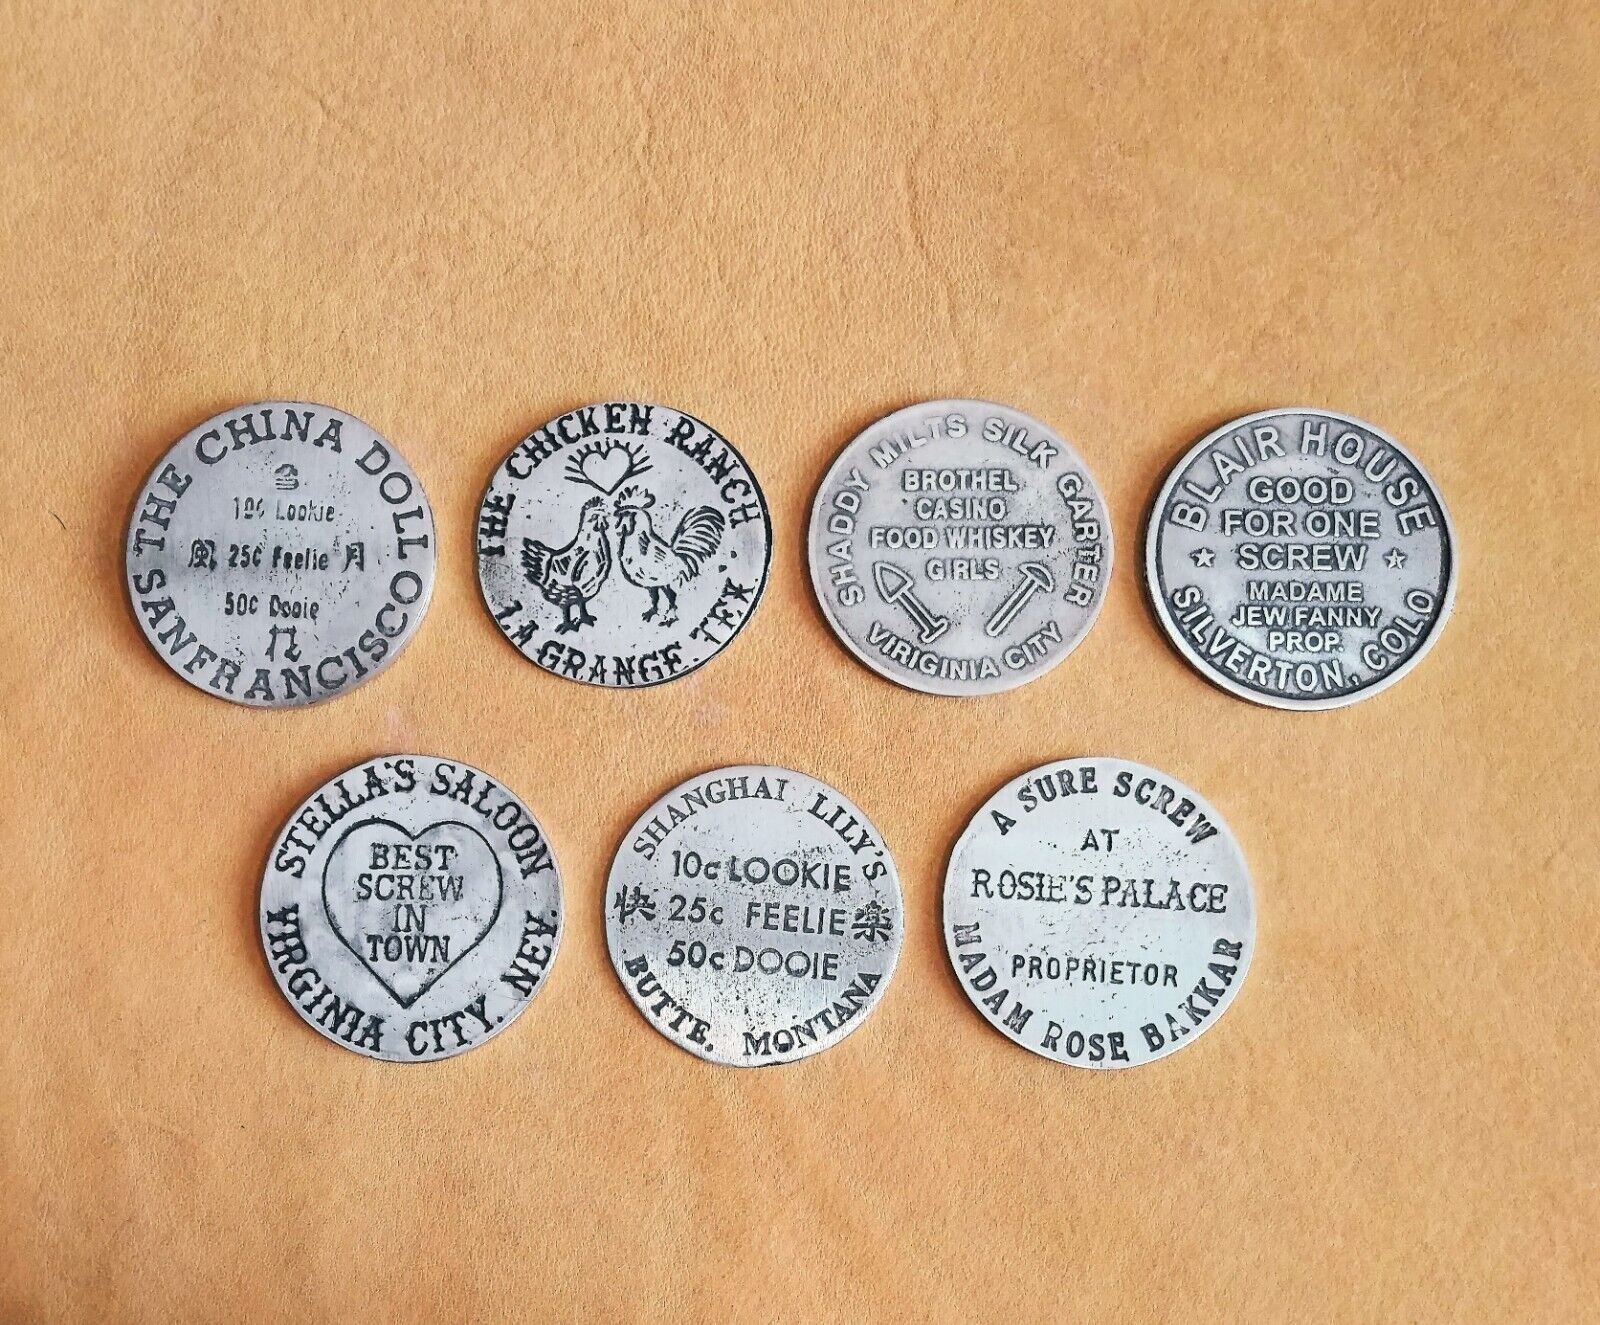 7 Brothel Tokens BBT 7-1 (Collectors Items) Made In The USA